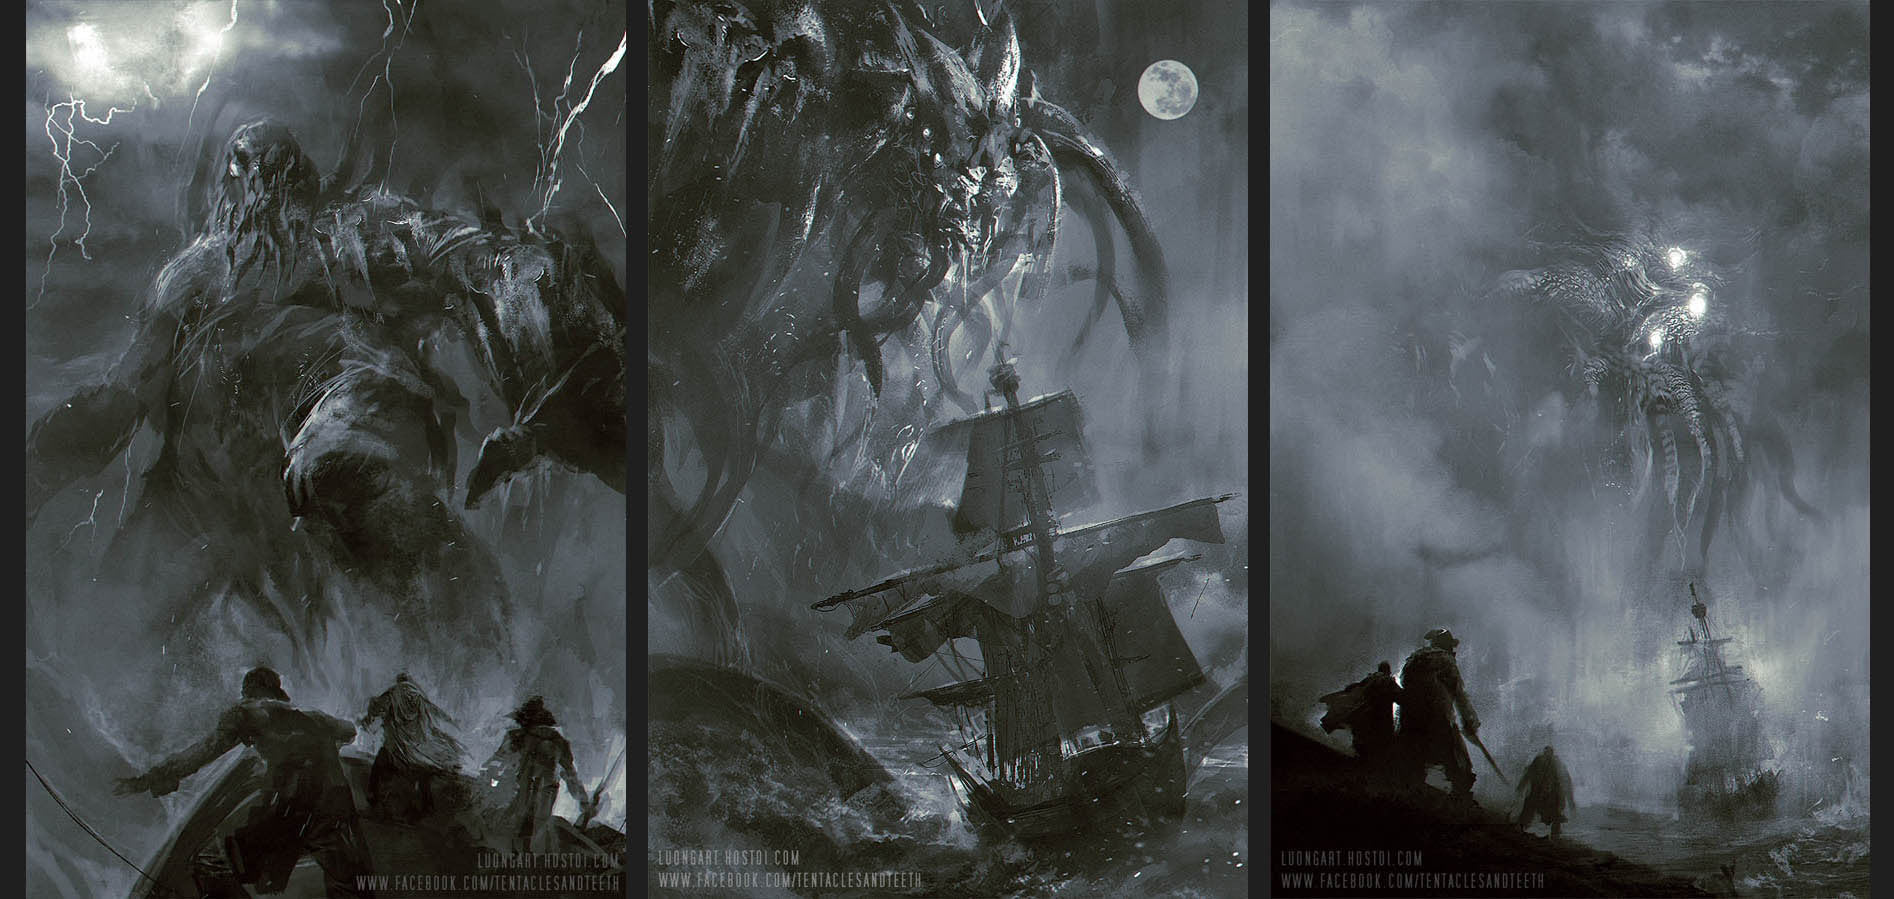 NEW TITLE REVEAL: Pirates of the Old World Unlocked in Cthulhu Mythos Kickstarter Campaign!